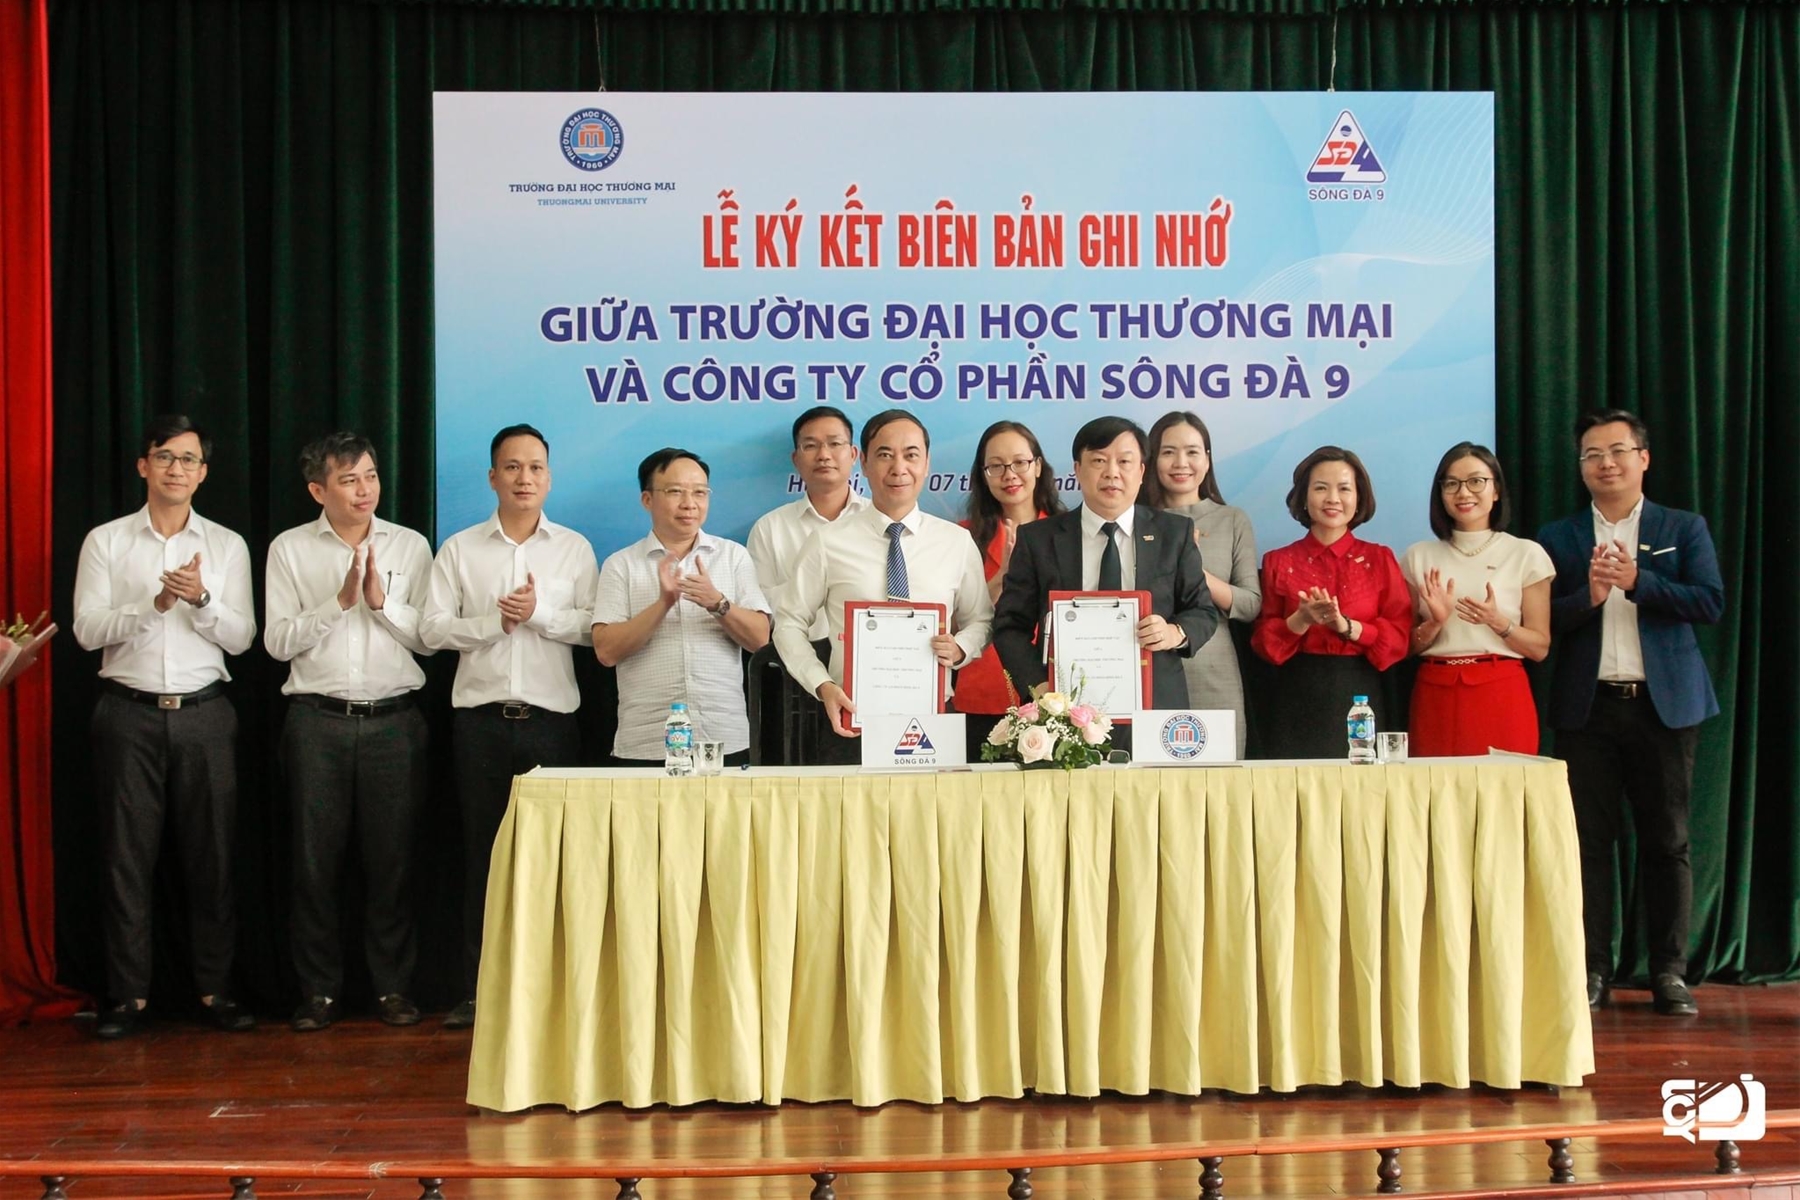 Signing ceremony of a Memorandum of Understanding between University of Commerce and Song Da 9 Joint Stock Company